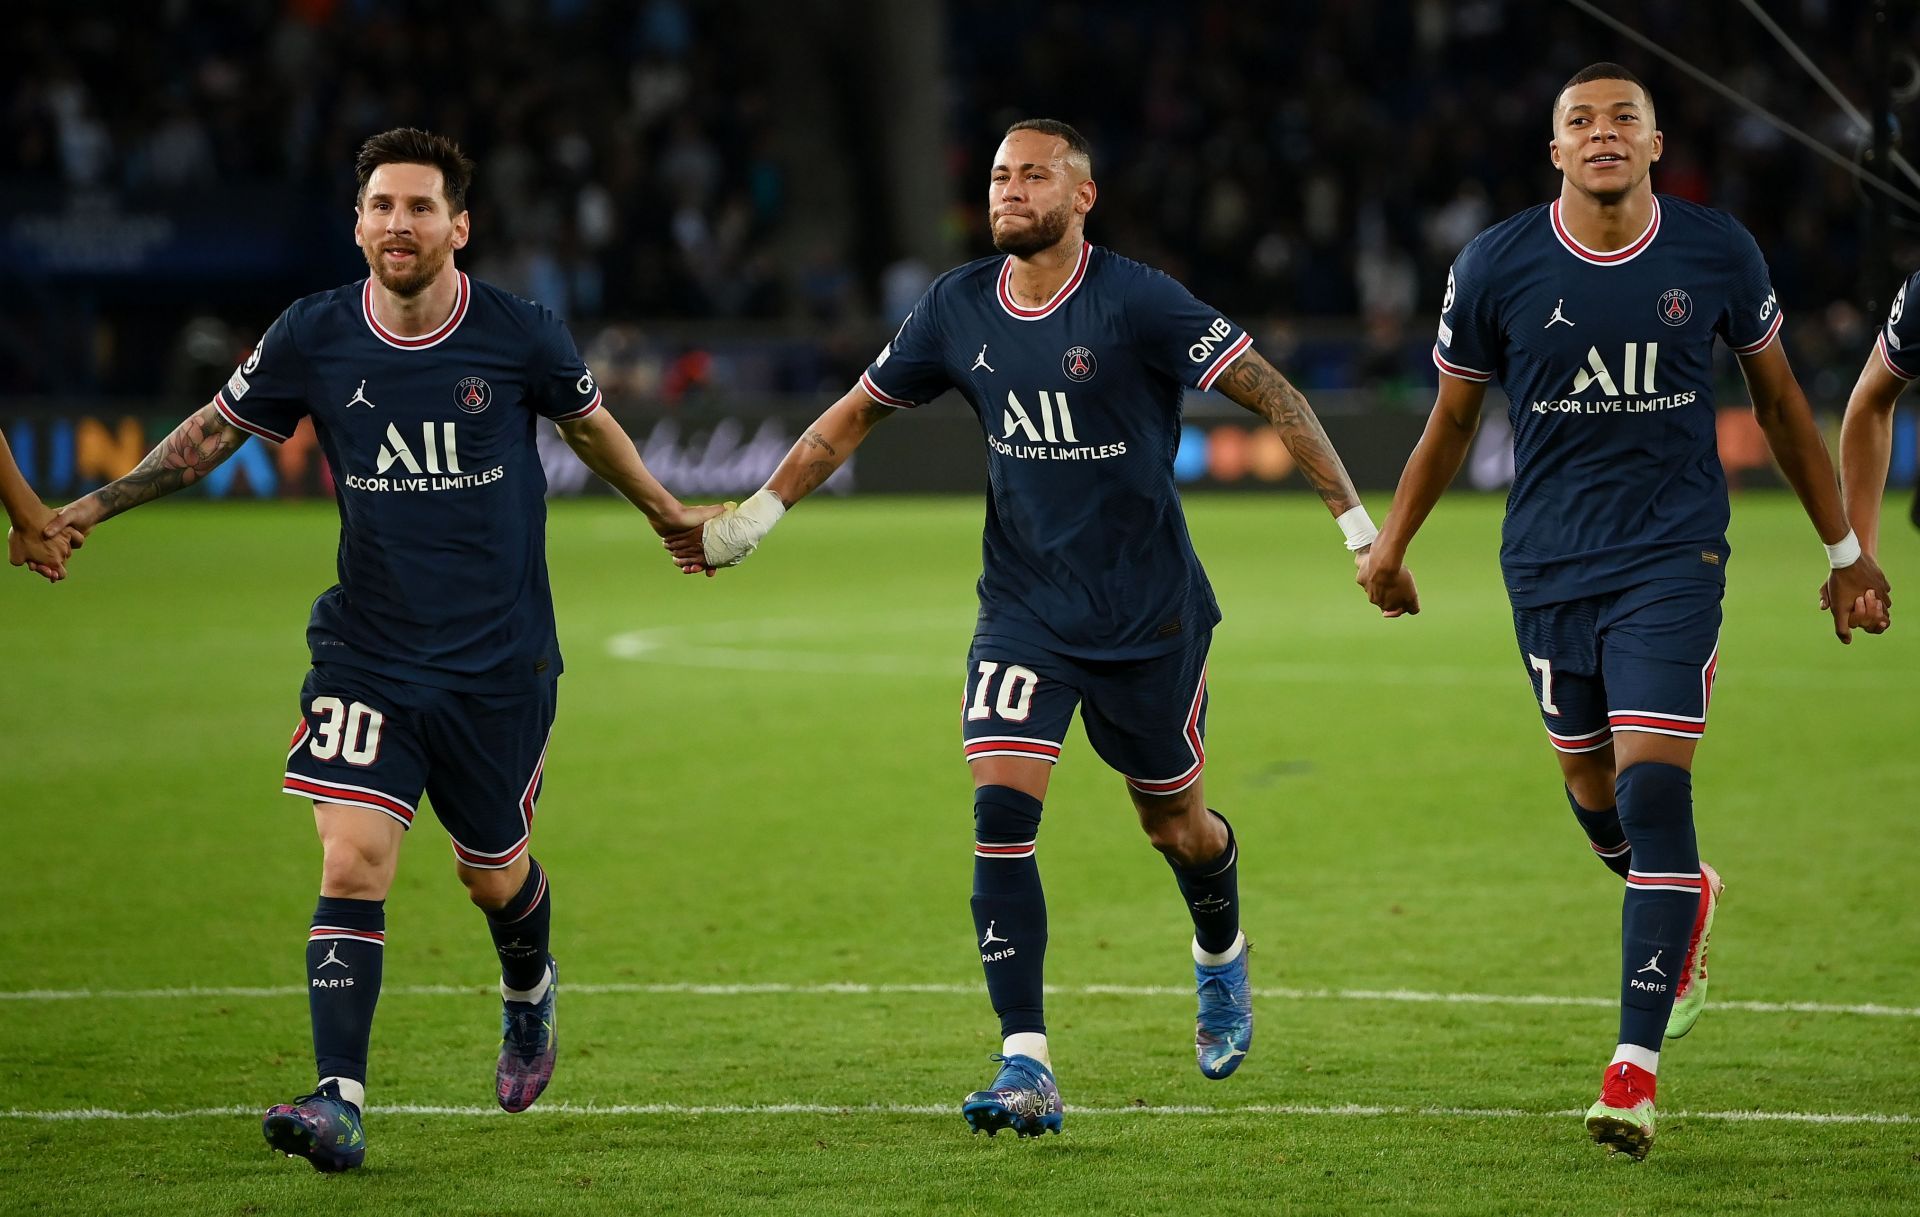 PSG take on Bordeaux in Ligue 1 this weekend